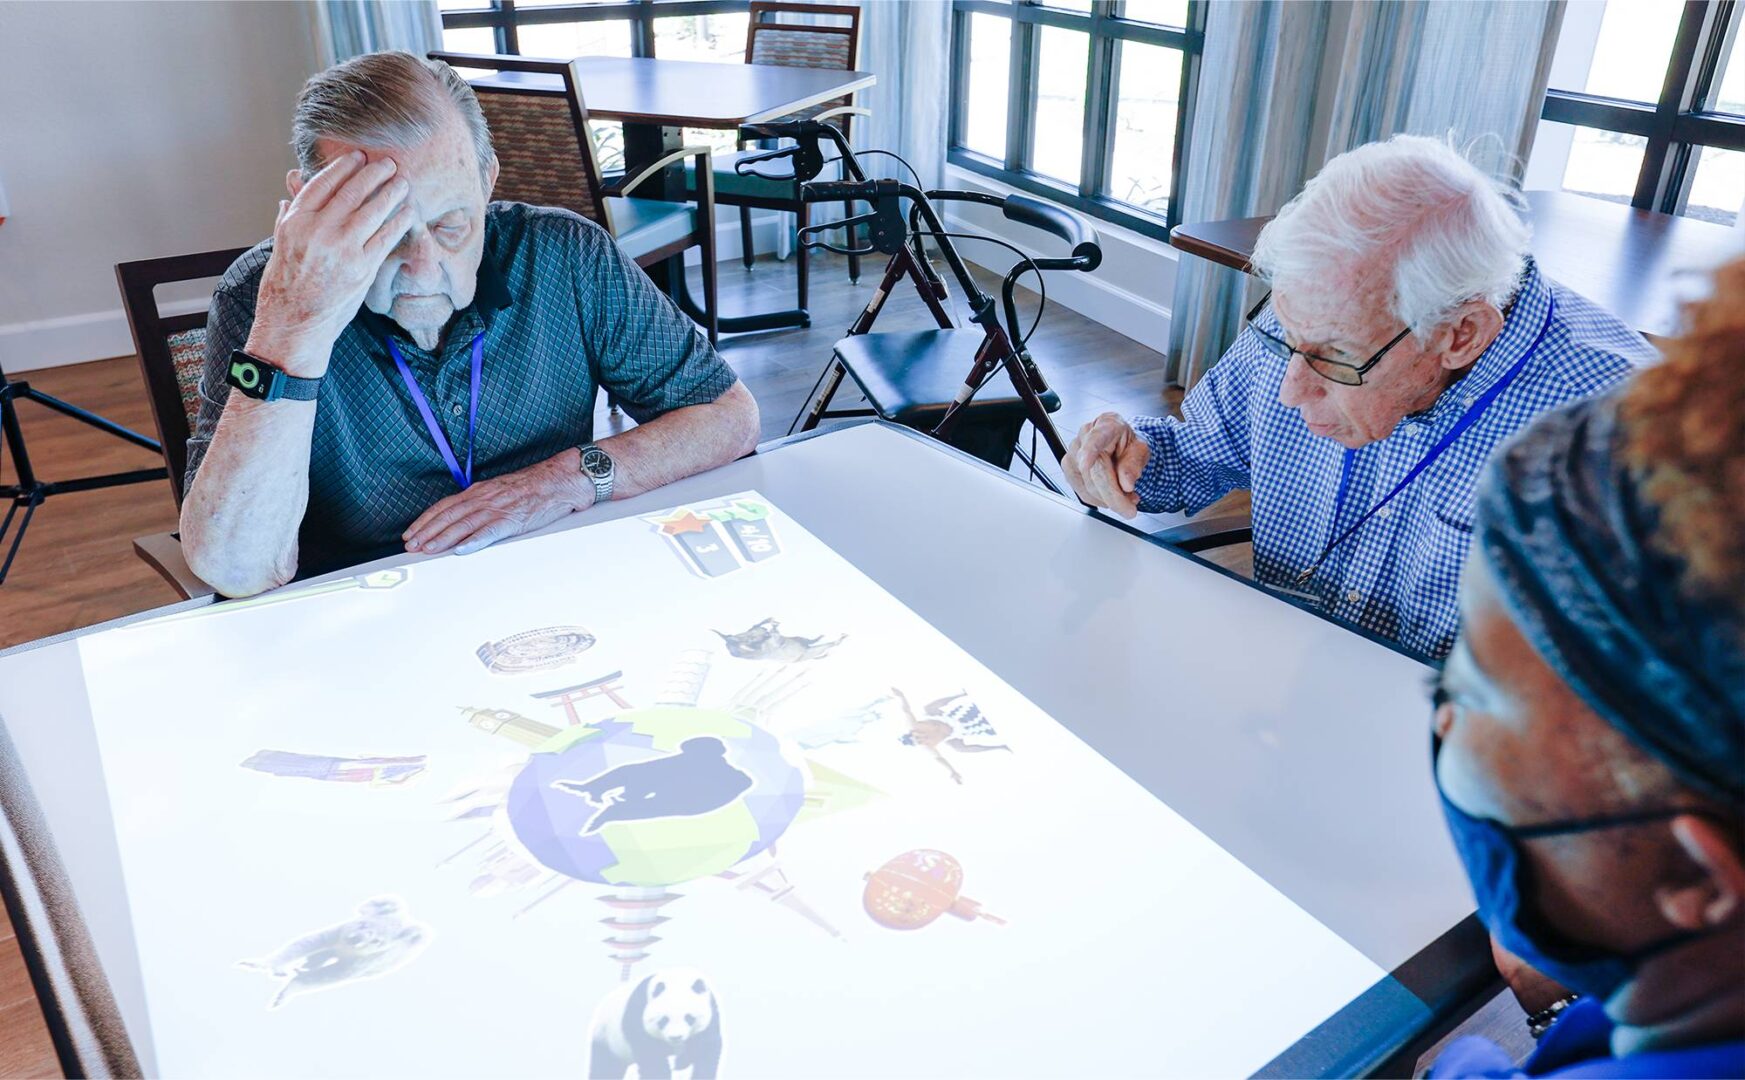 Two older people playing a board game in a room.